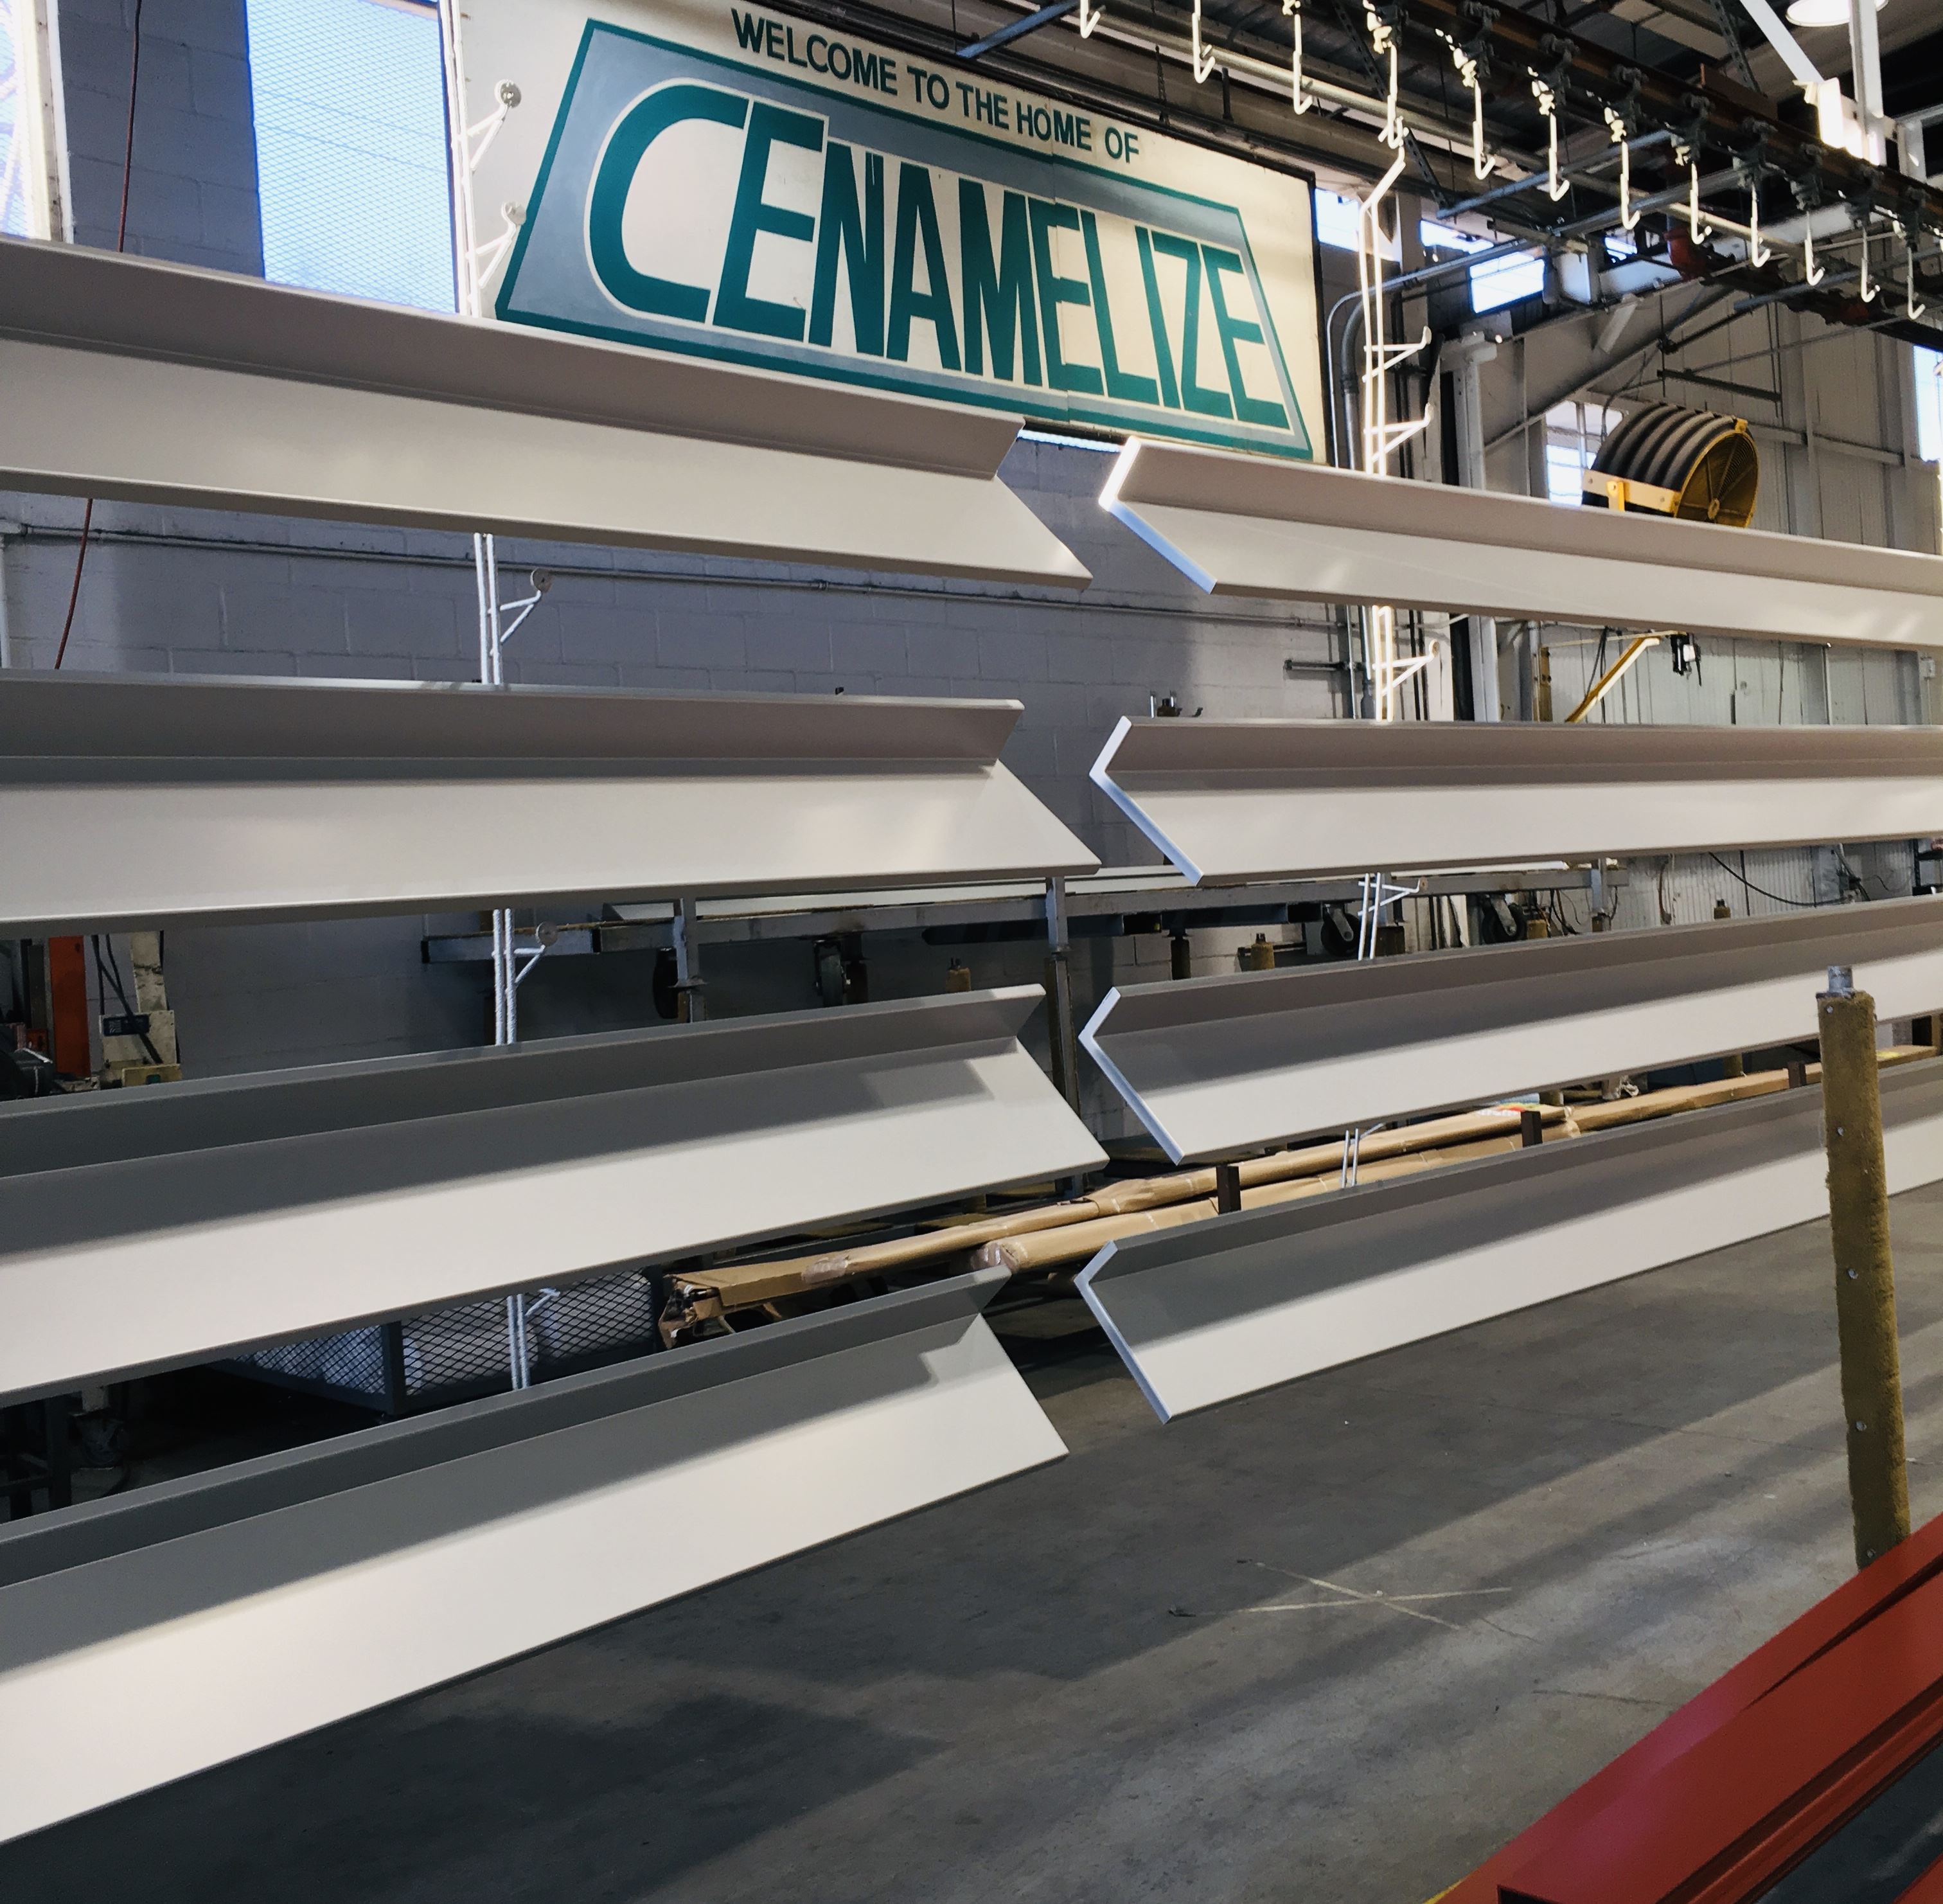 Metal beams in racks under a sign that says, "Welcome to the home of Cenamelize"